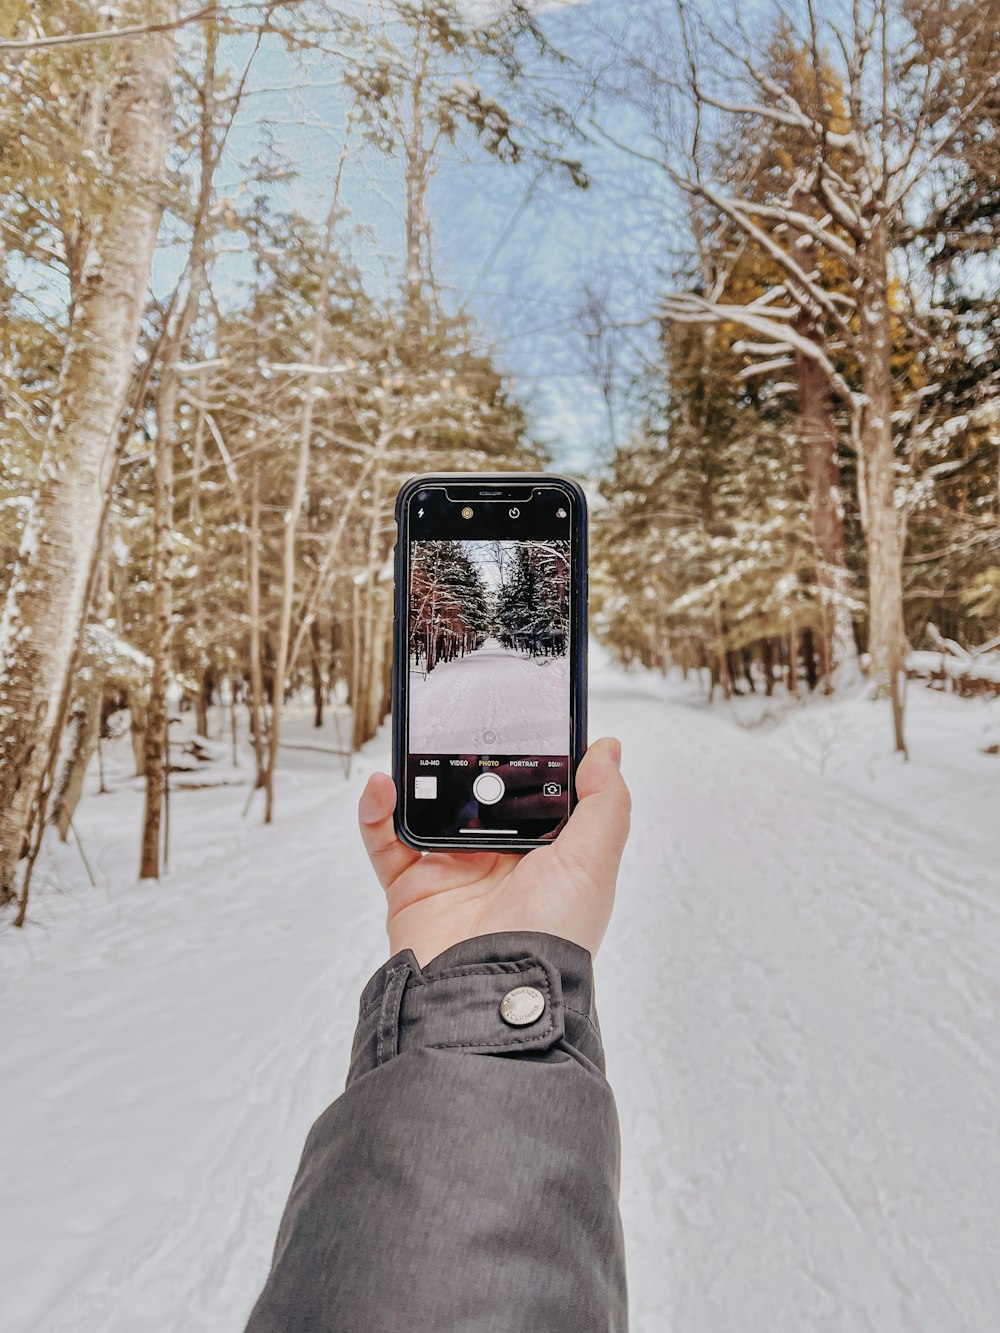 person holding black iphone 5 taking photo of snow covered ground